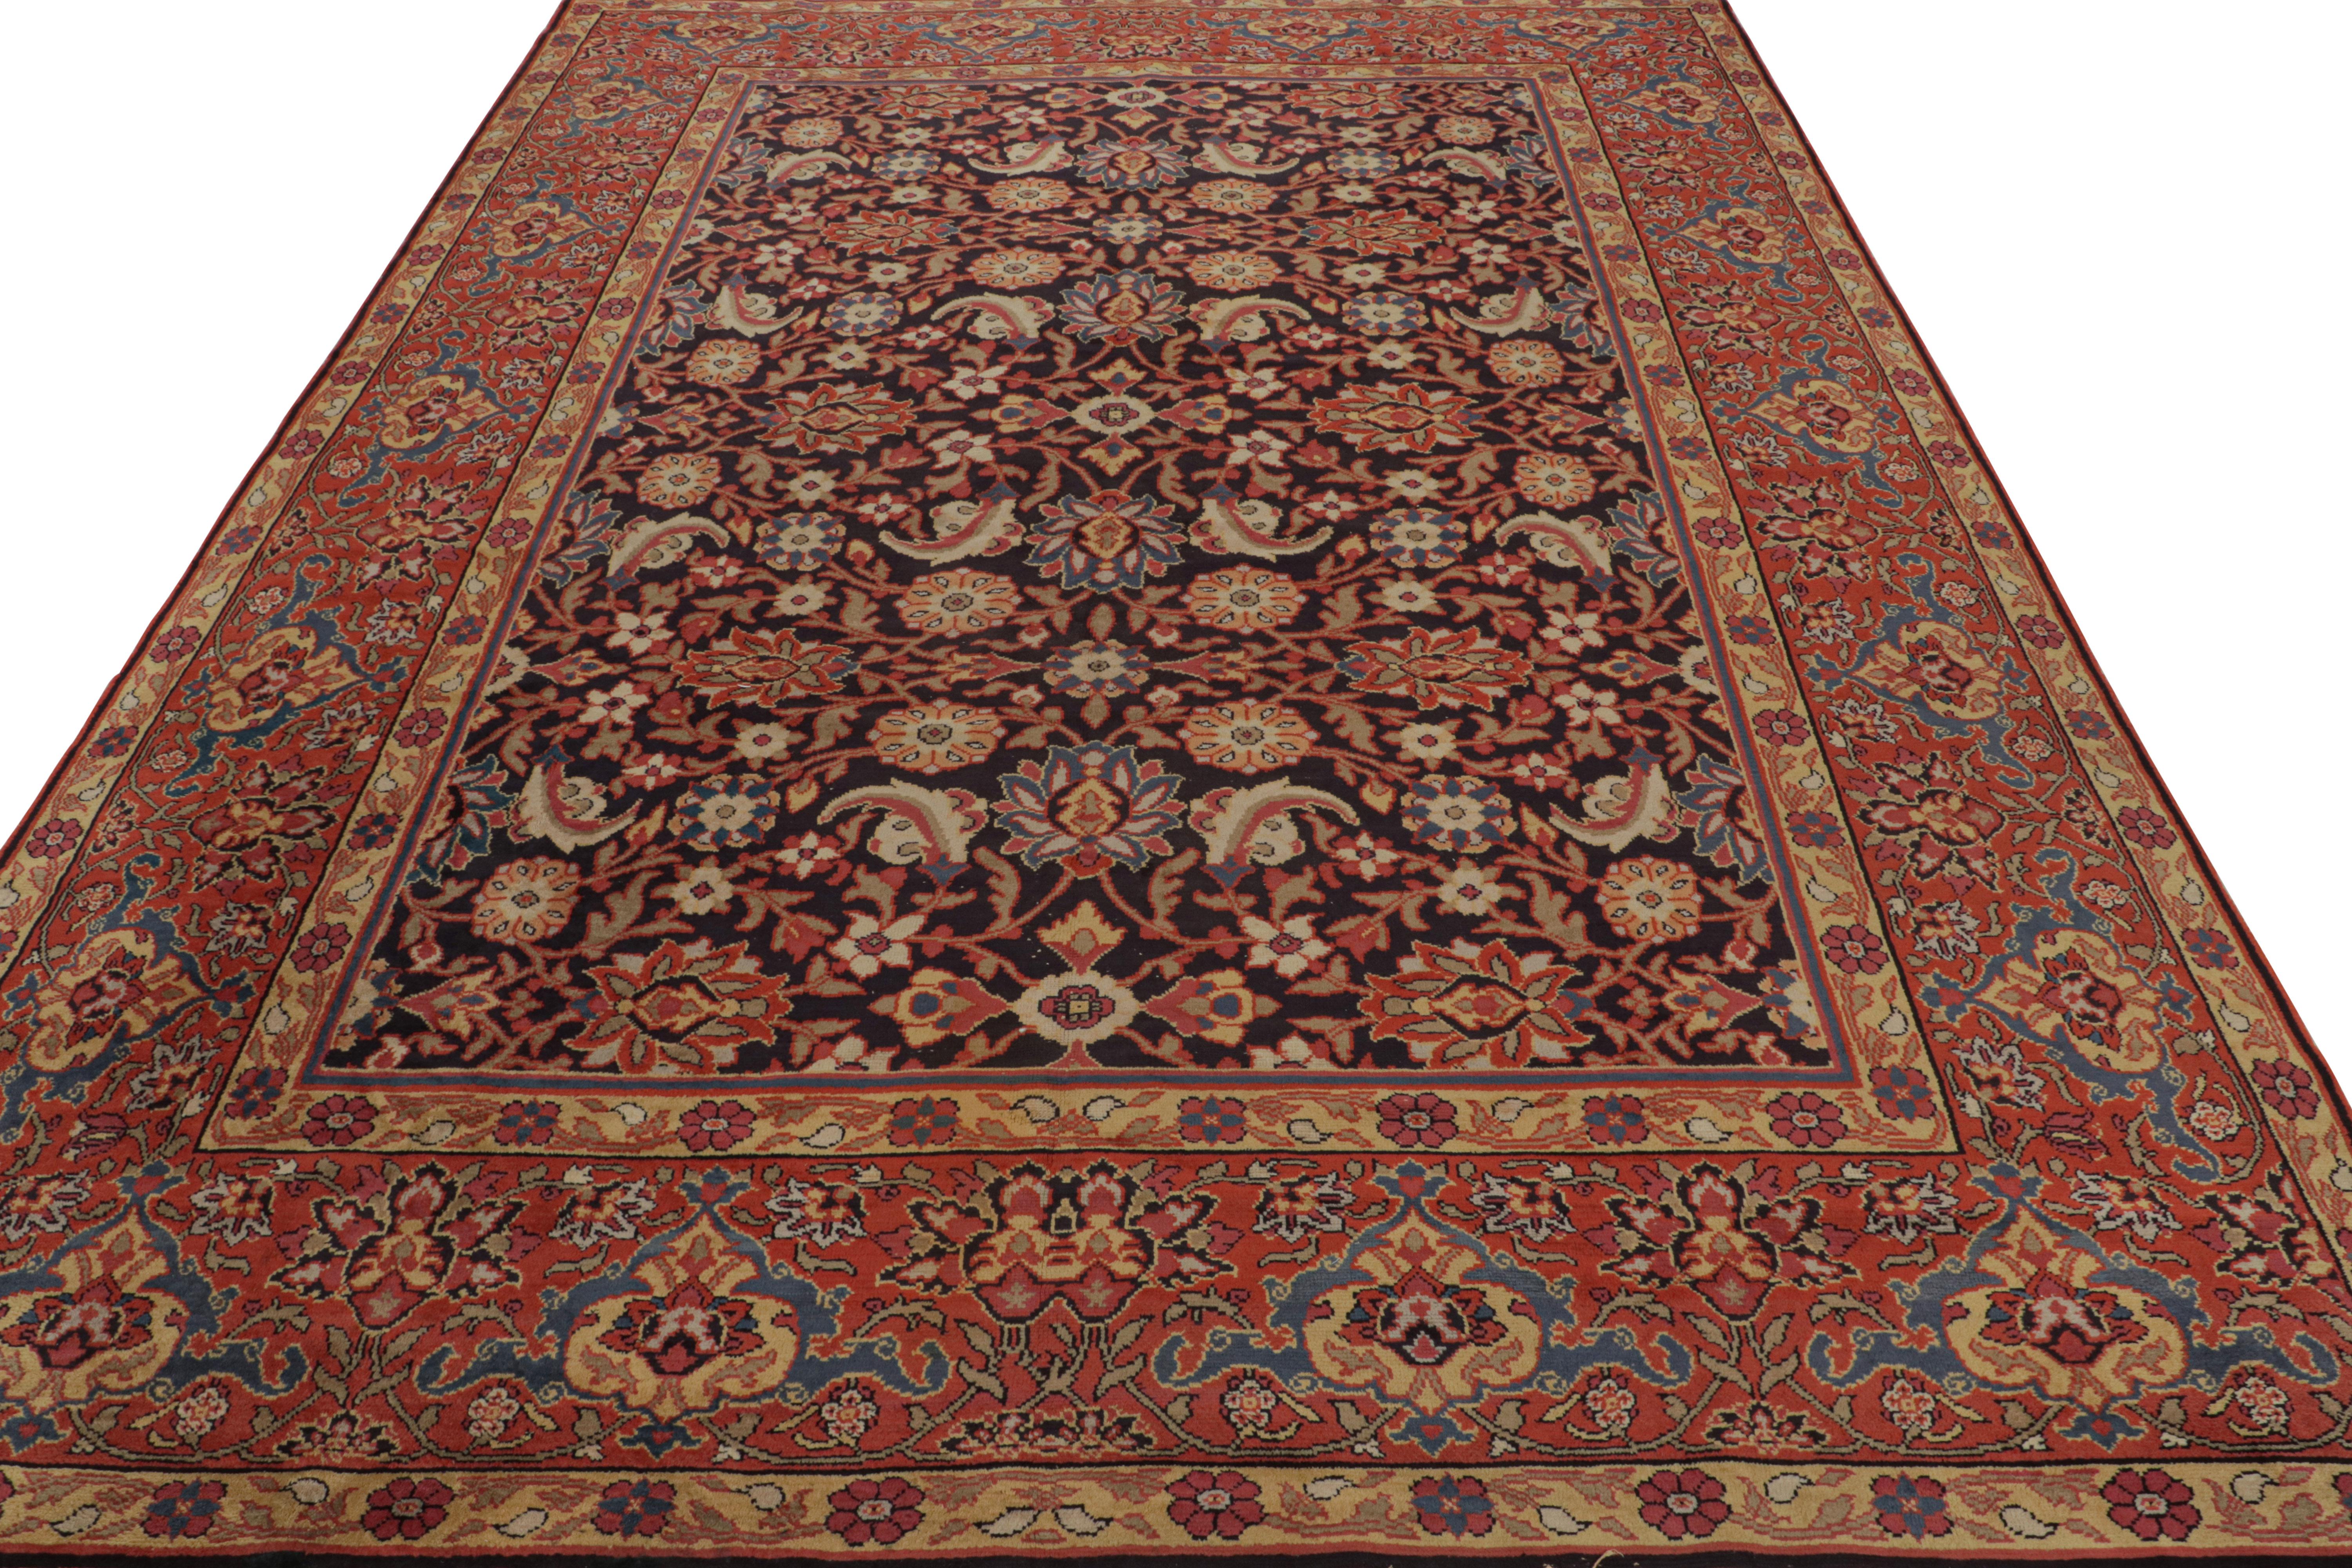 Hand-knotted in wool, an antique 8x11 European rug originating from Ireland circa 1920-1930 - inspired by Persian rugs of the same and preceding periods

On the Design:

The design enjoys a black field and red border alike underscoring floral